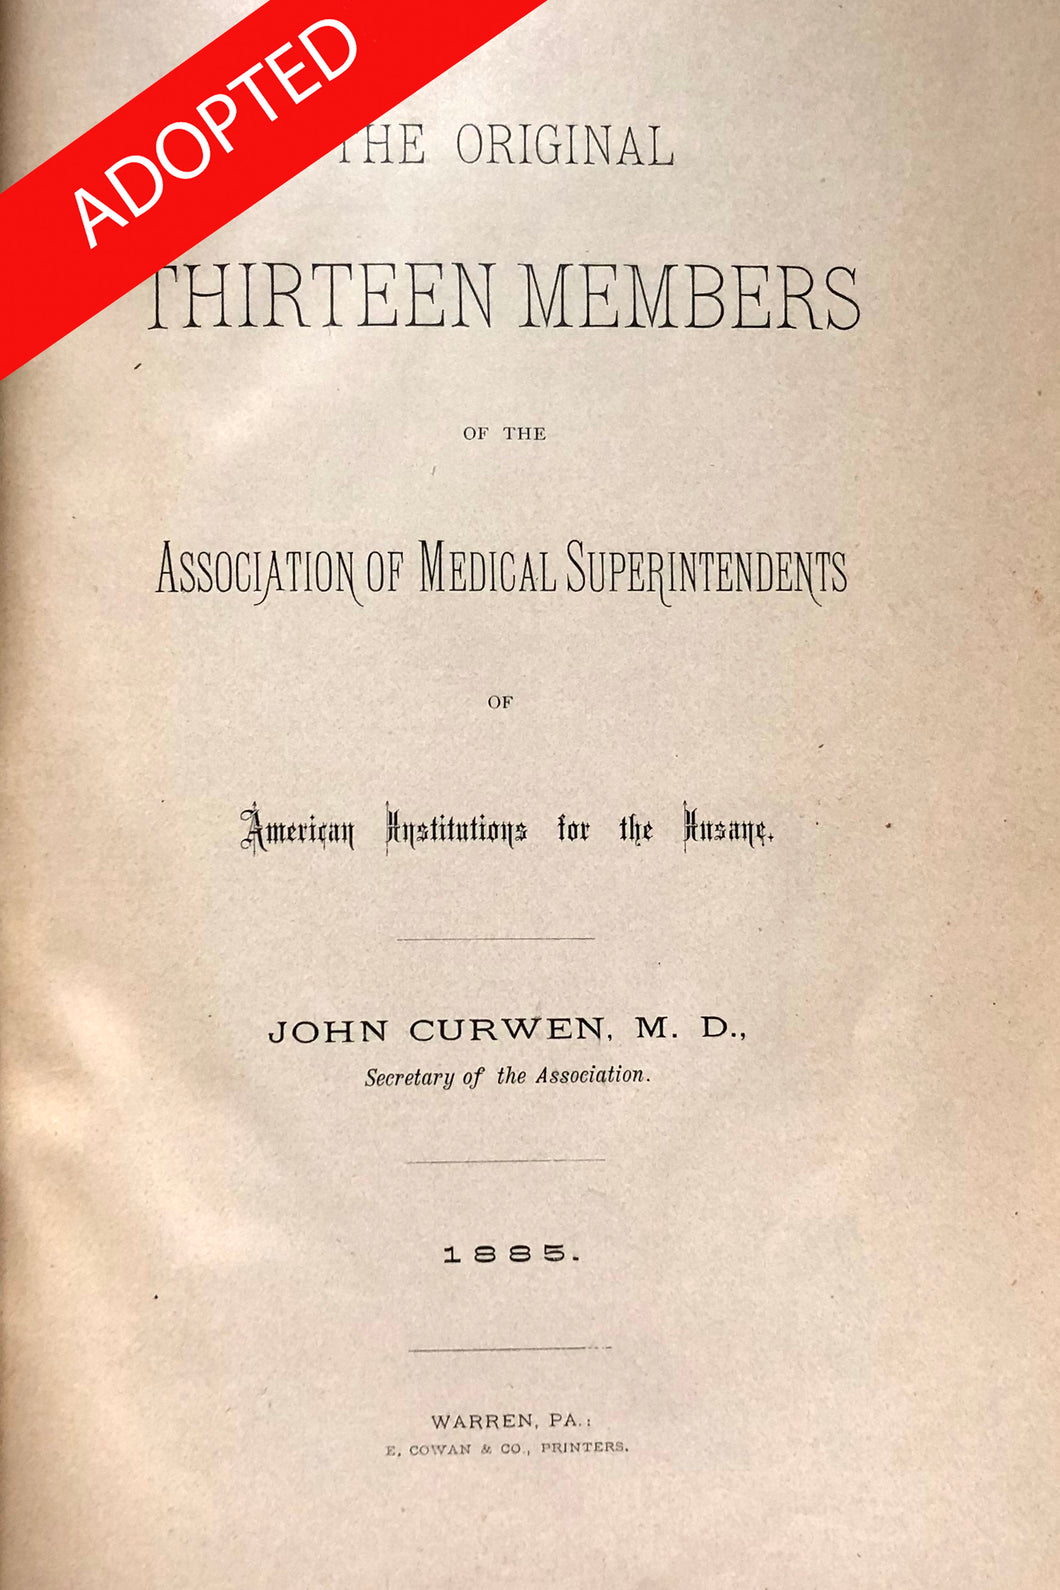 The original thirteen members of the Association of Medical Superintendents of American institutions for the insane